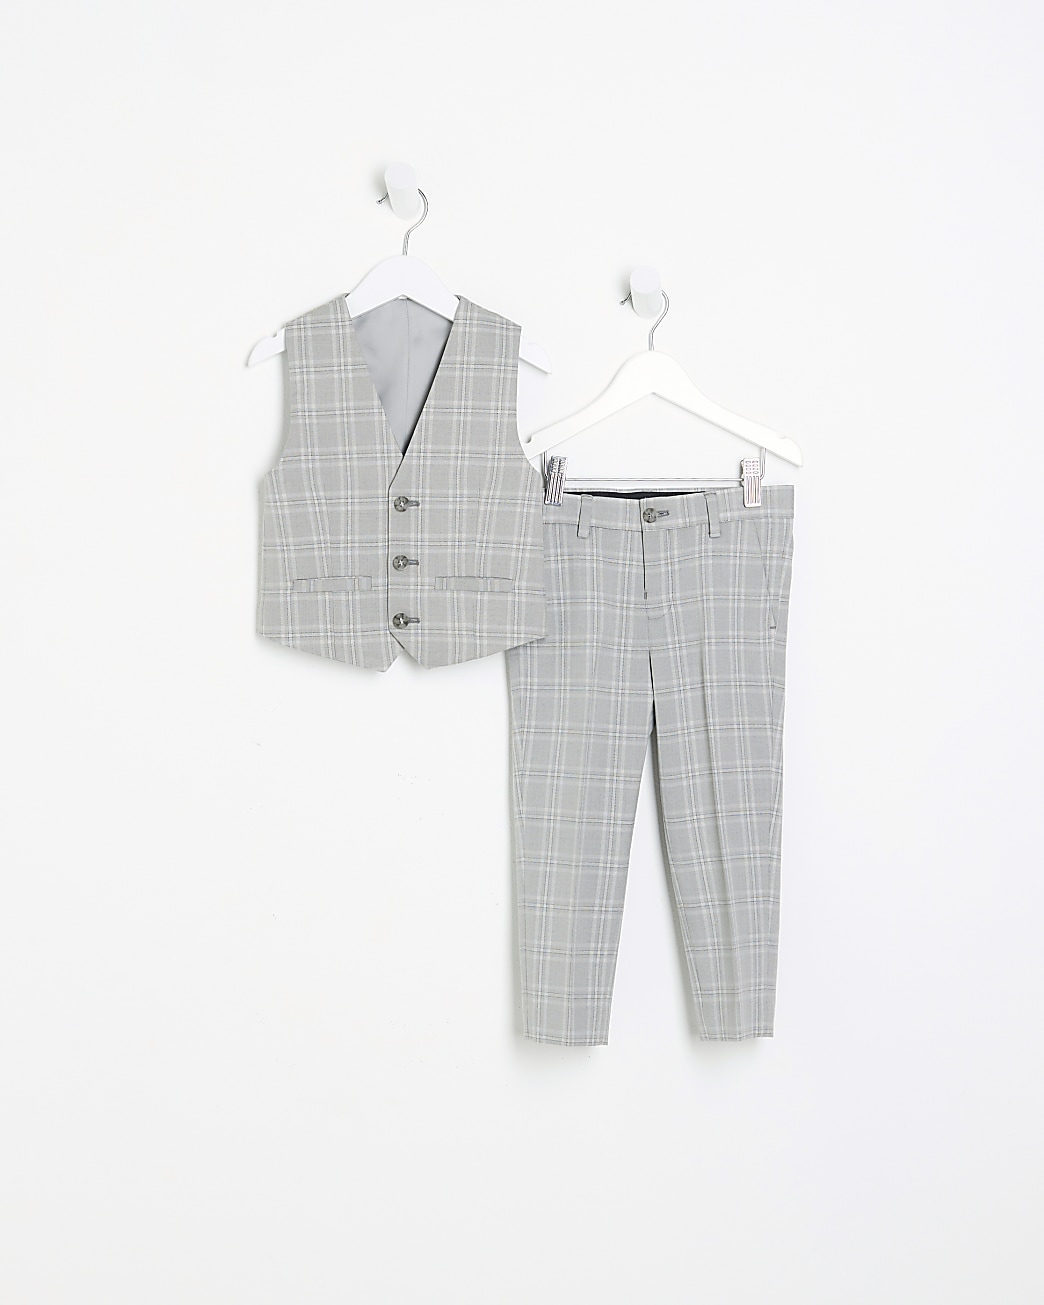 Visual filter display for Baby Boys Suits